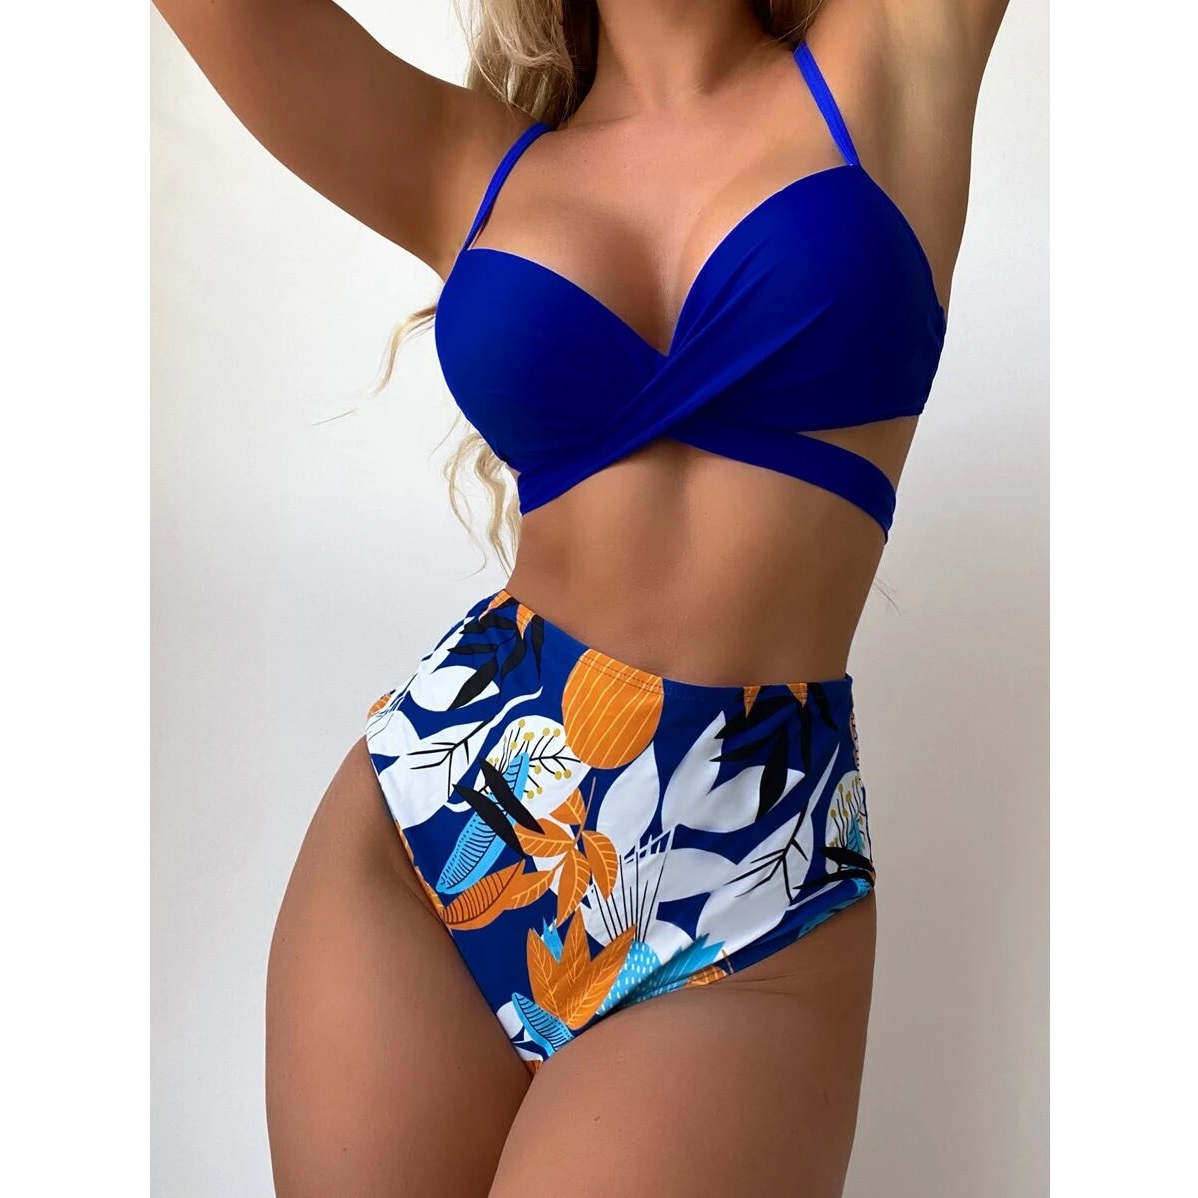 Discover more than 210 high waisted bathing suits